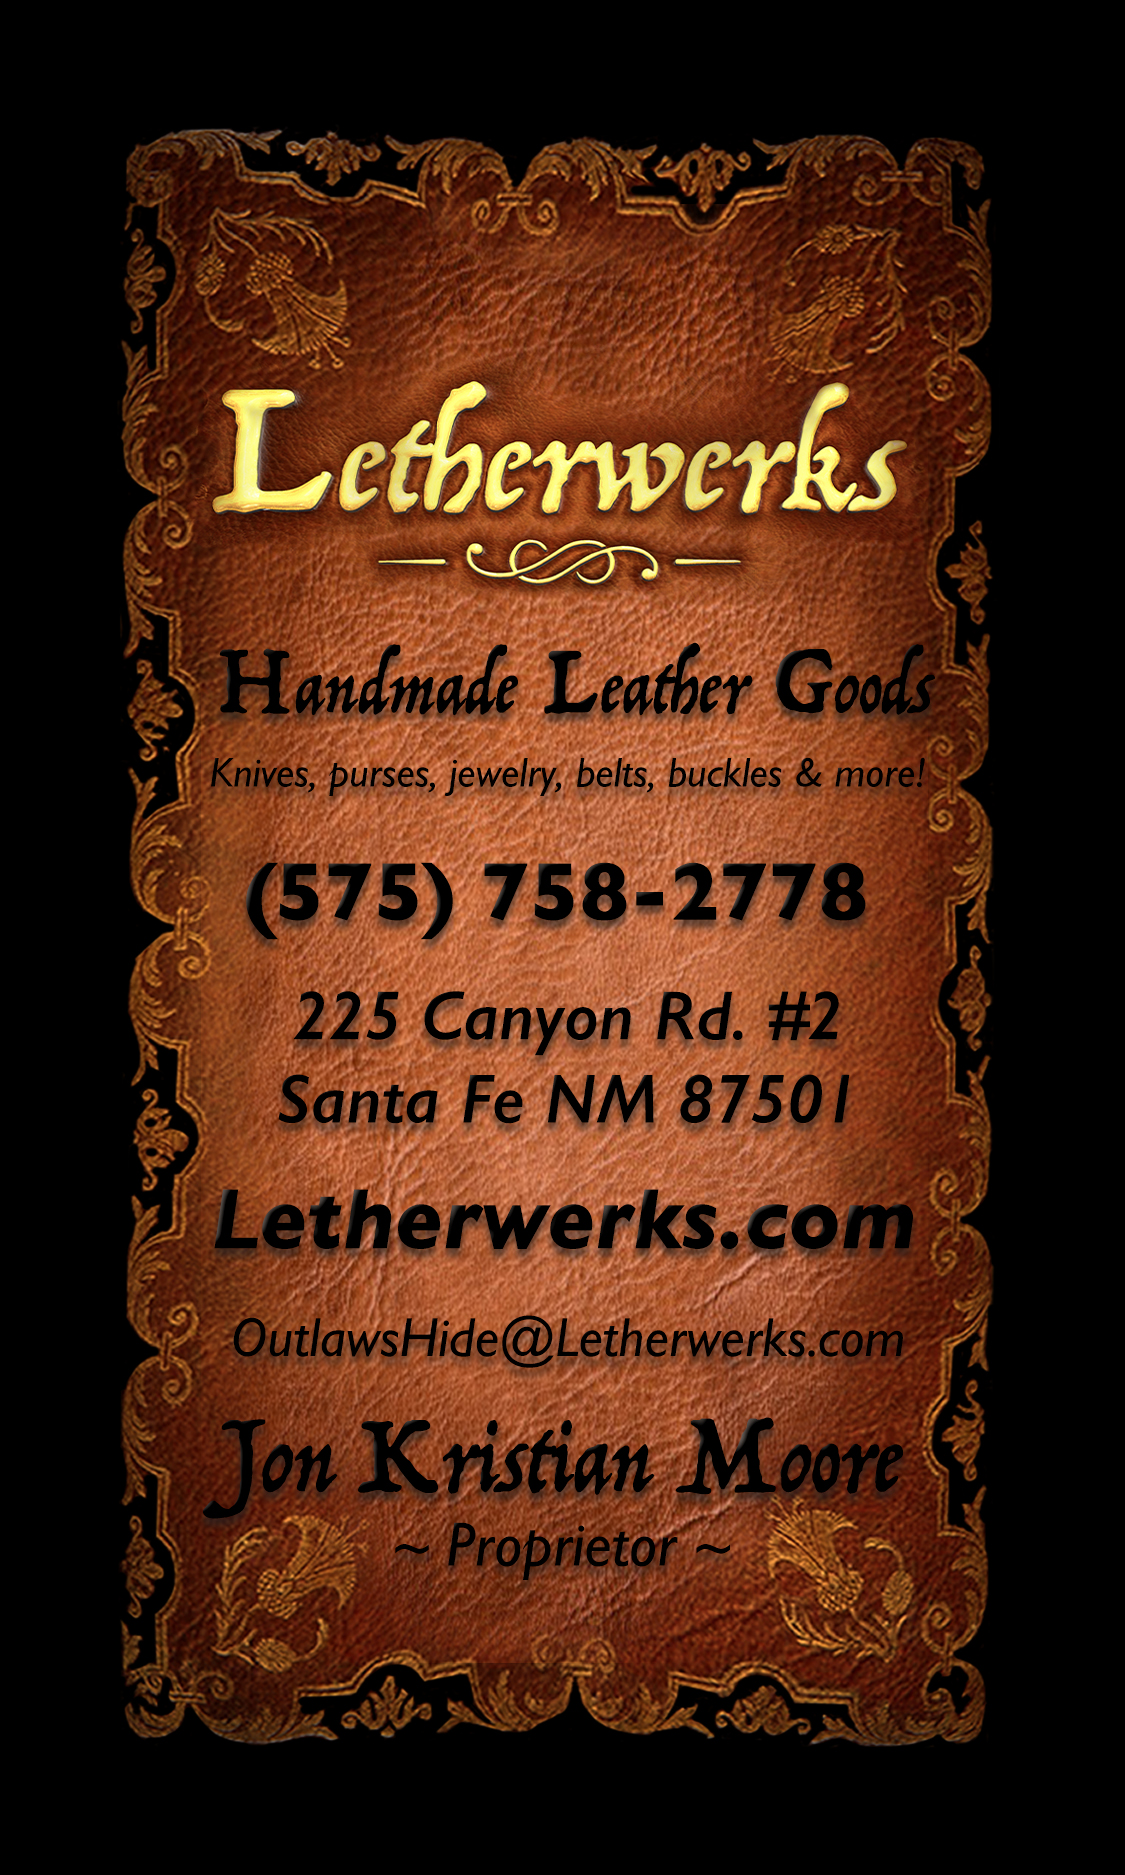 Letherwerks Business Cards: 2019 Update